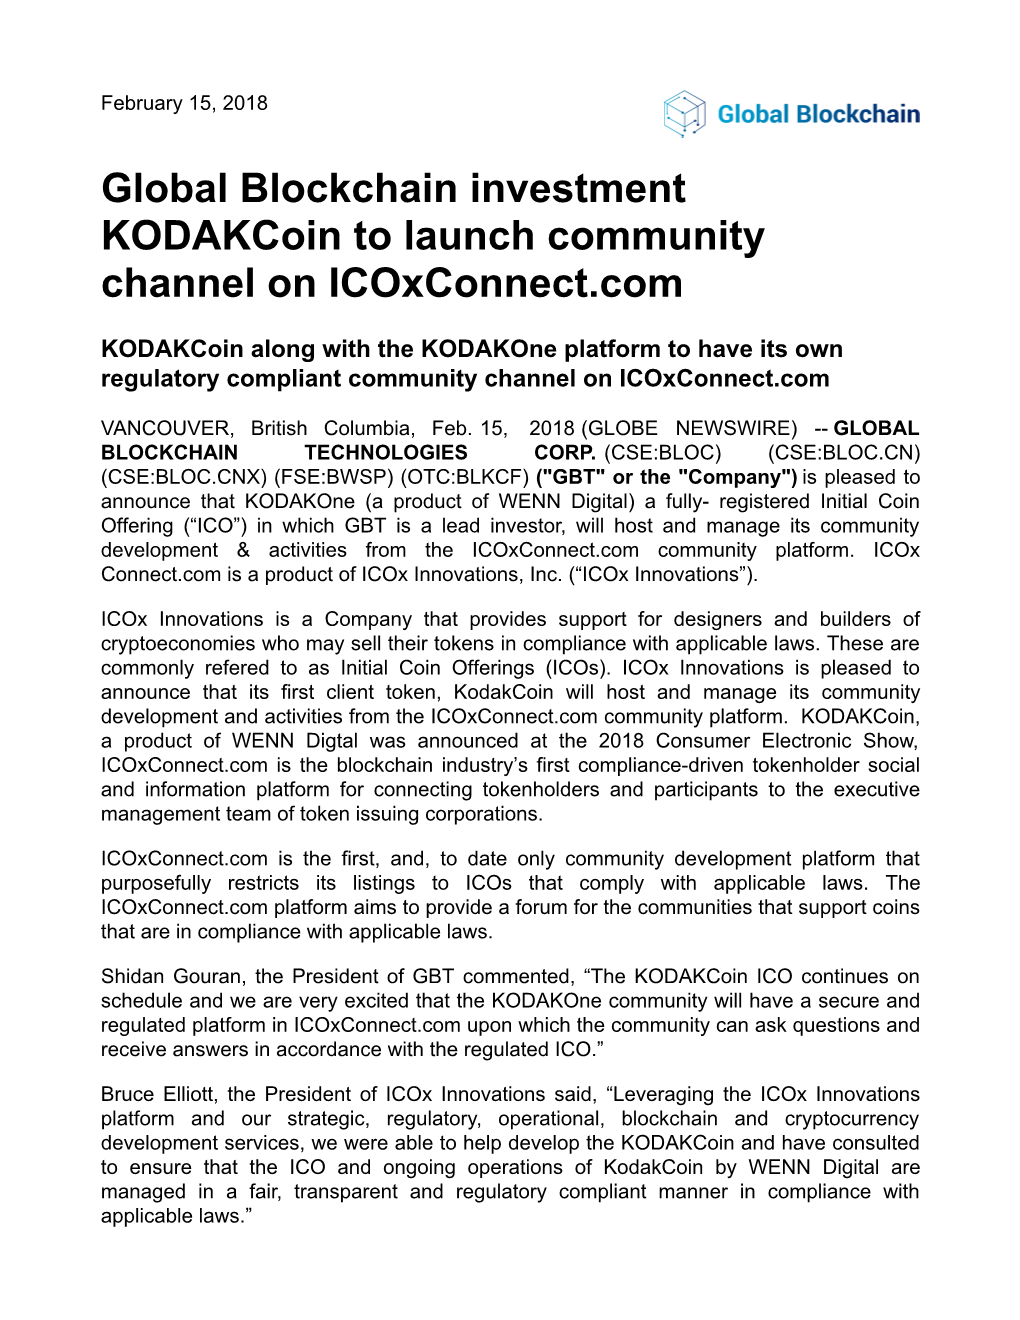 Global Blockchain Investment Kodakcoin to Launch Community Channel on Icoxconnect.Com